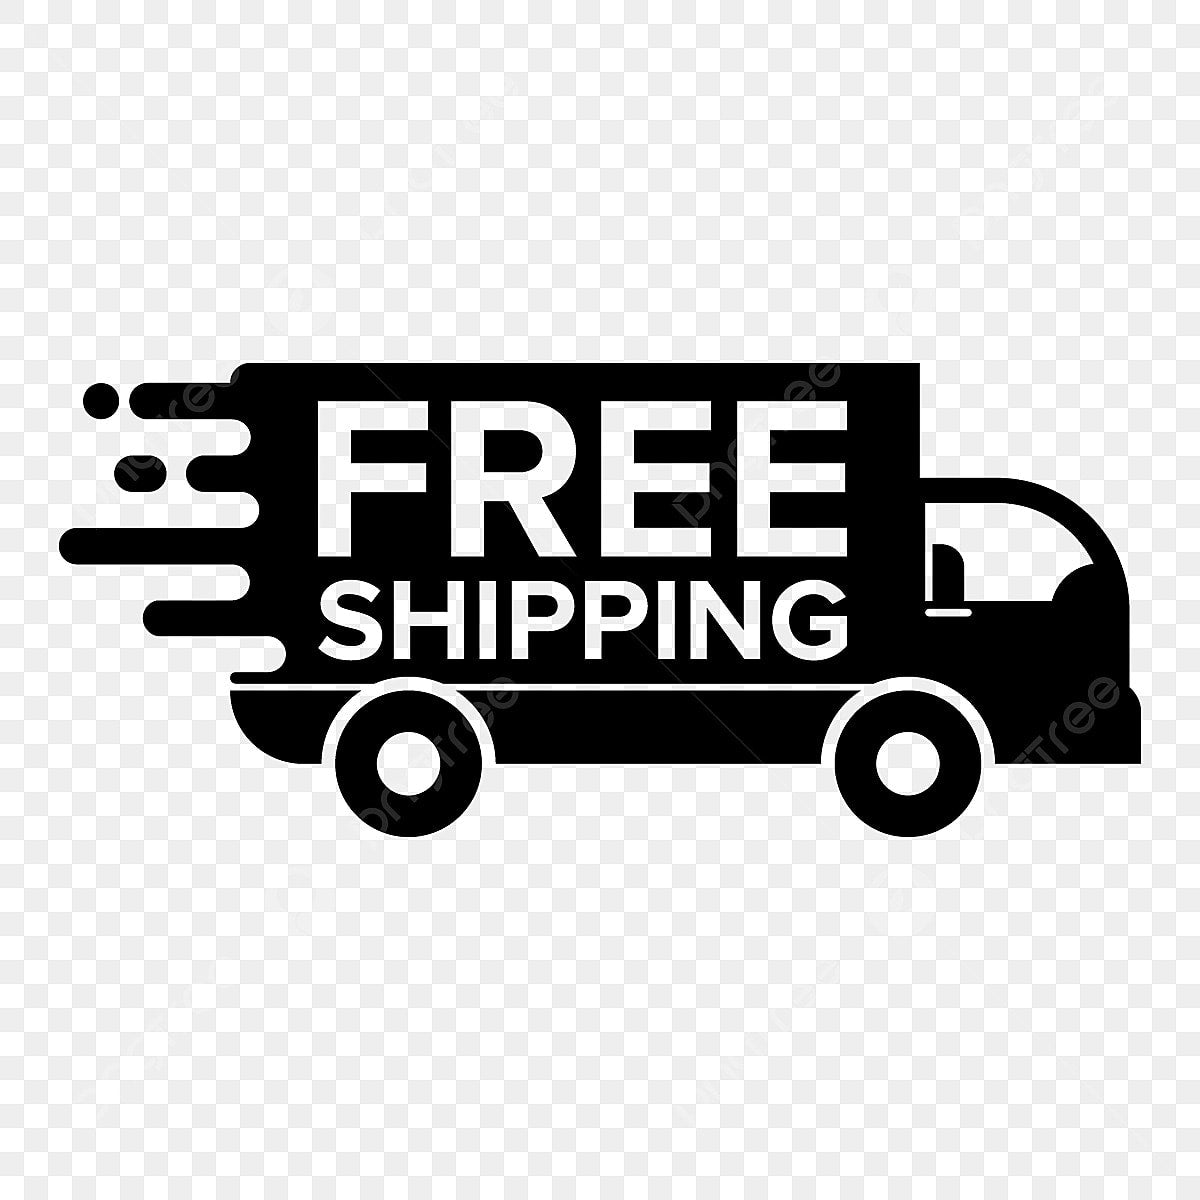 Free Shipping on orders of $25 or more - Fashion Hut Jewelry